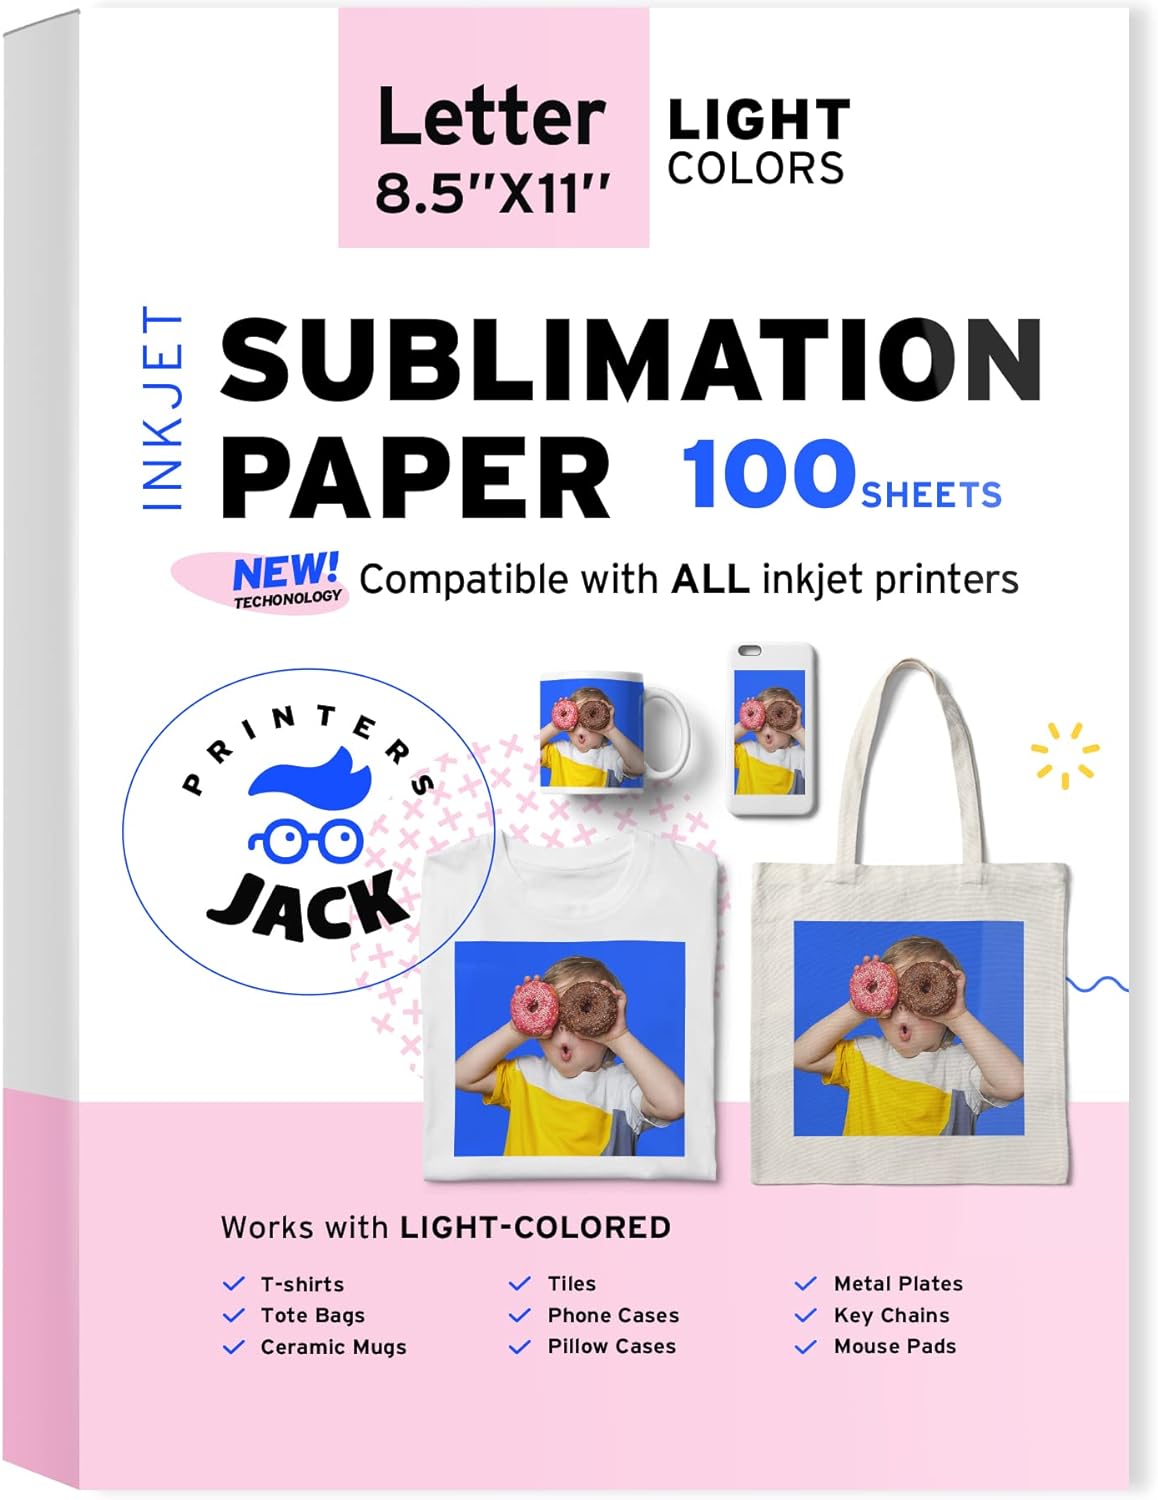 5 x Heat Proof Thermal Tape Dye Sublimation Ink T-Shirt Heat Transfer 10mmx33m 